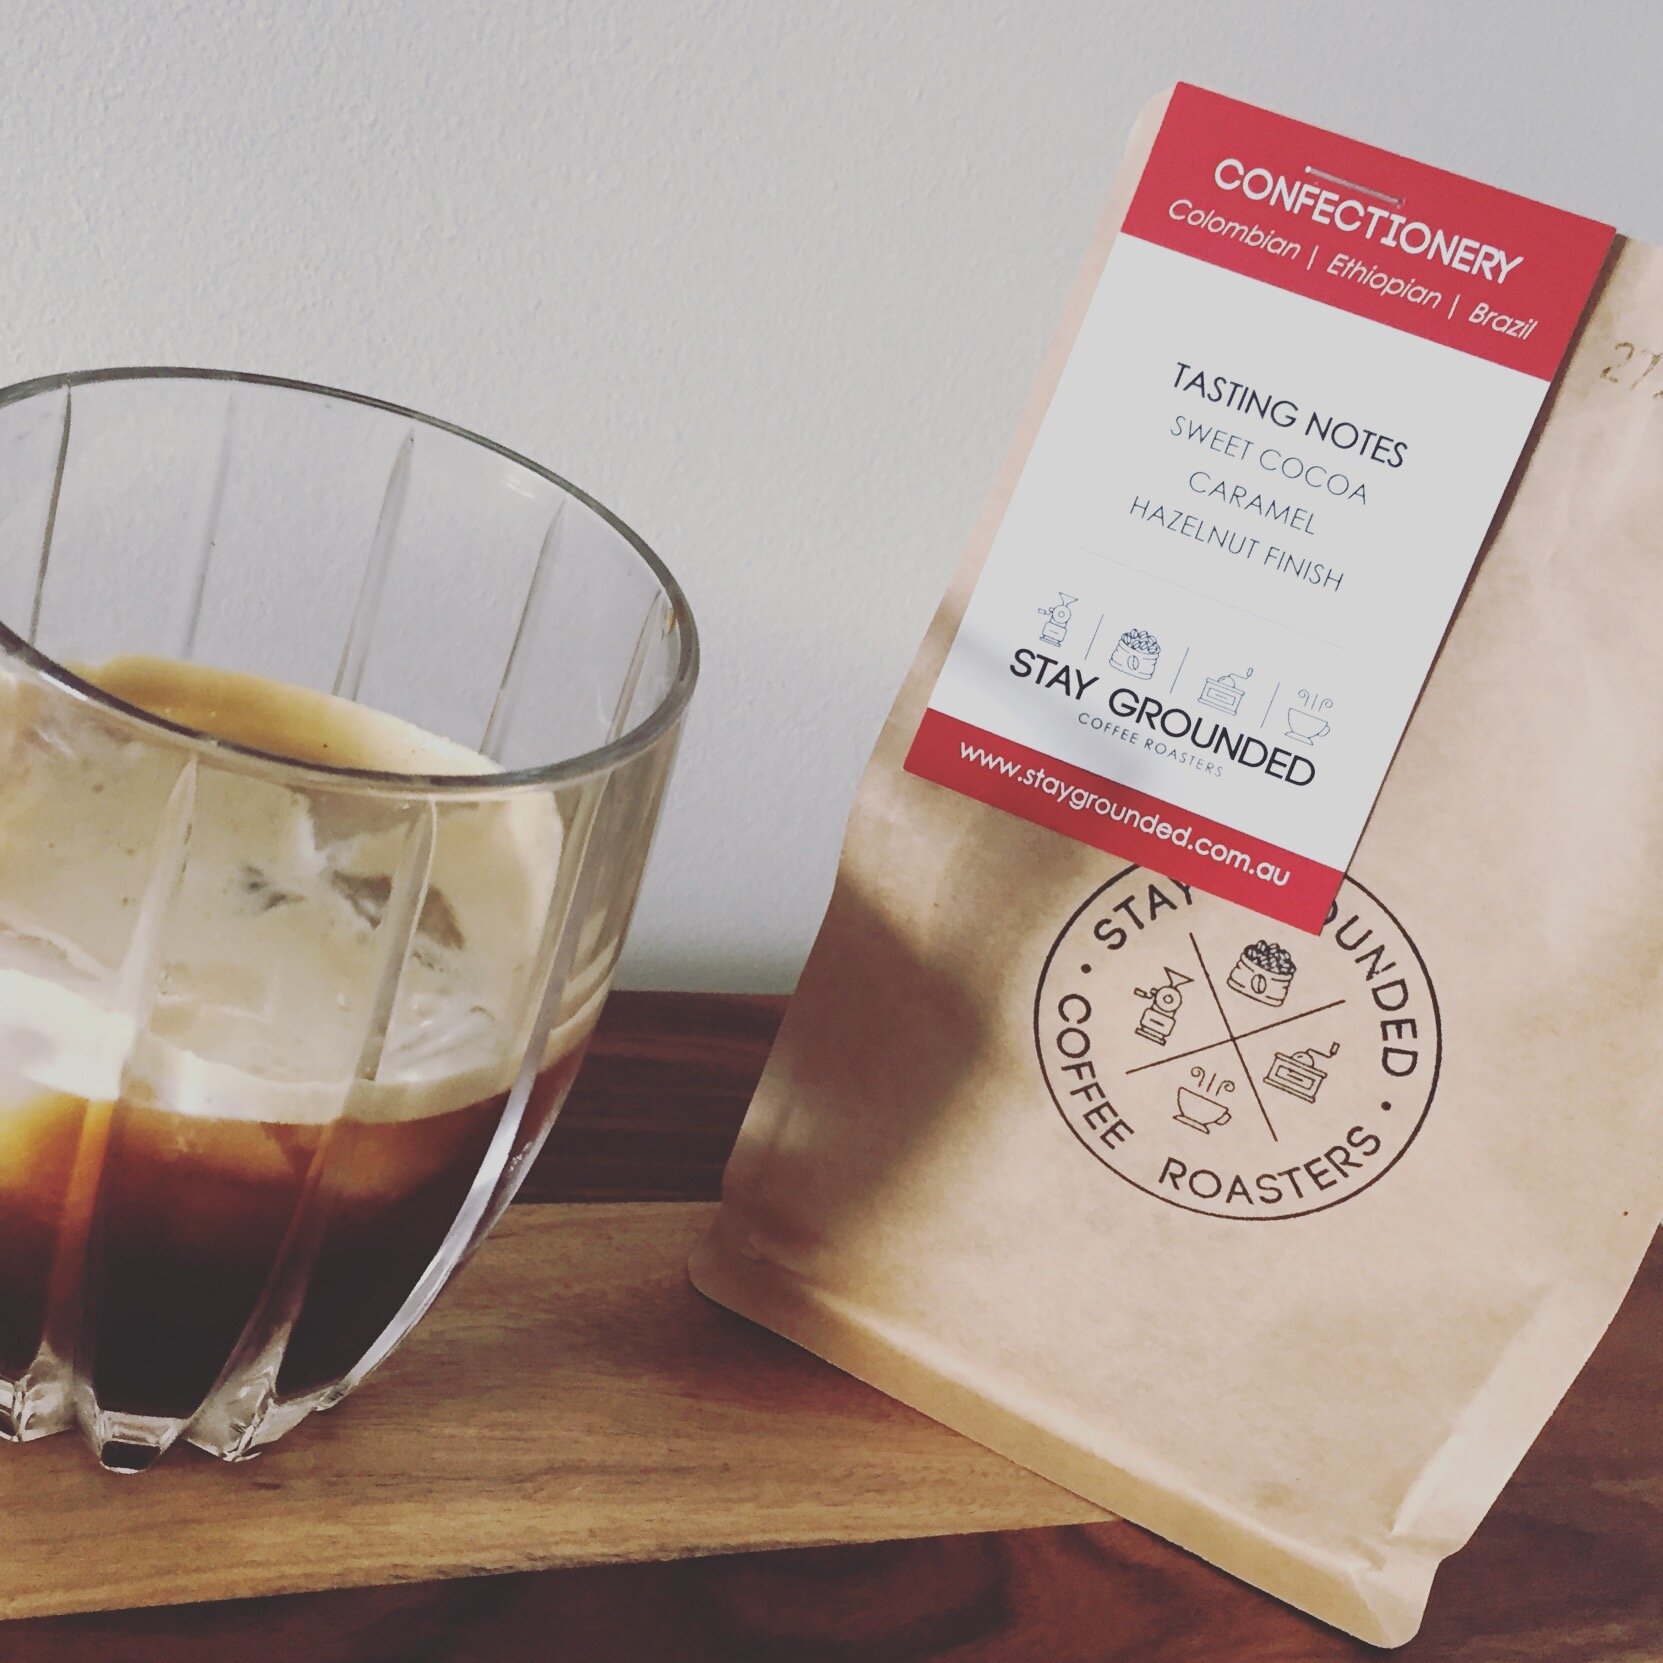 Coffee Snob staff have been loving this blend as espresso over ice in the warm Perth weather.